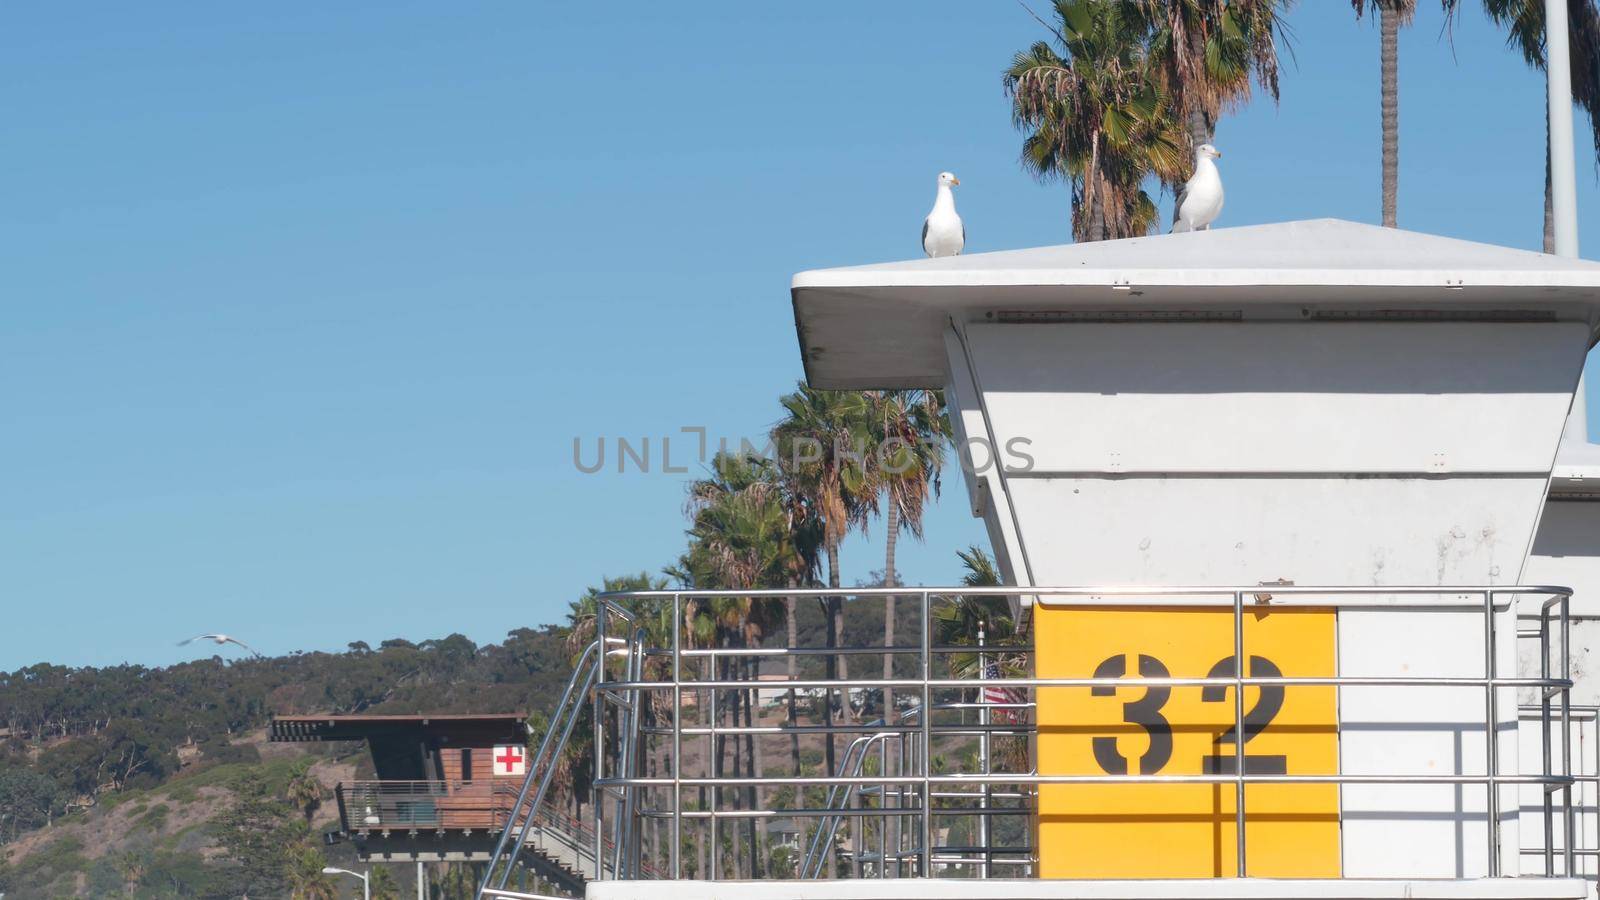 Lifeguard stand or life guard tower hut, surfing safety on California beach, USA by DogoraSun